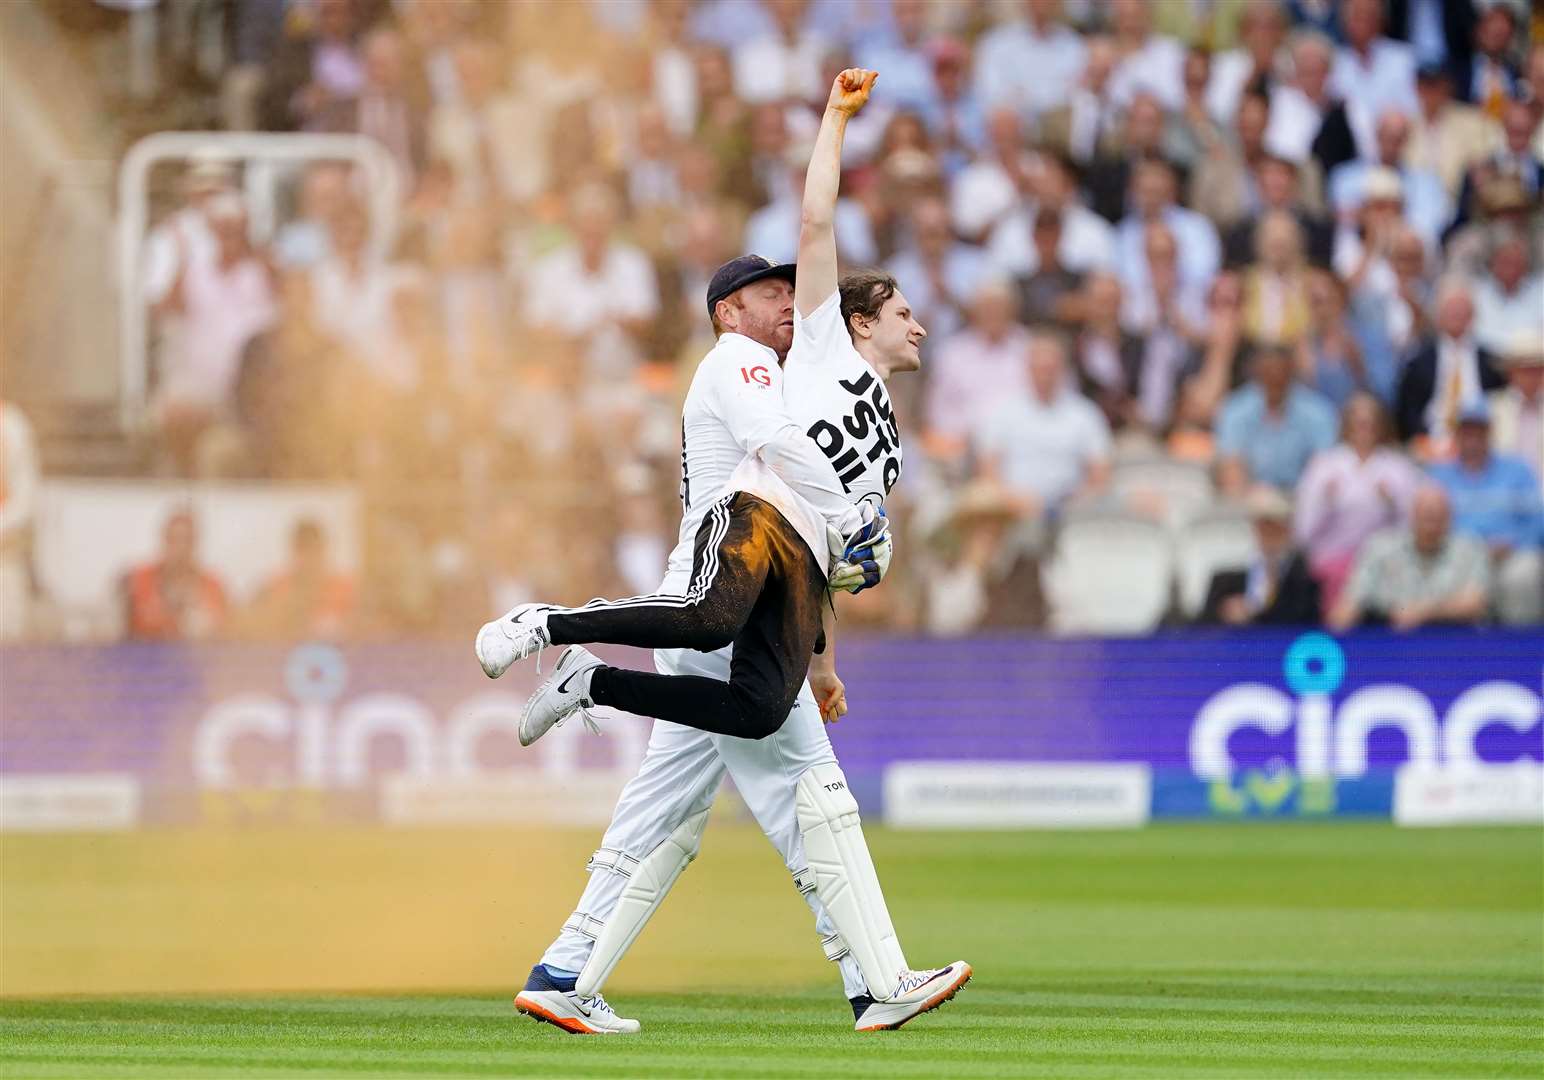 England cricketer Jonny Bairstow removes a Just Stop Oil protester from the pitch during the second Ashes test match at Lord’s (Mike Egerton/PA)